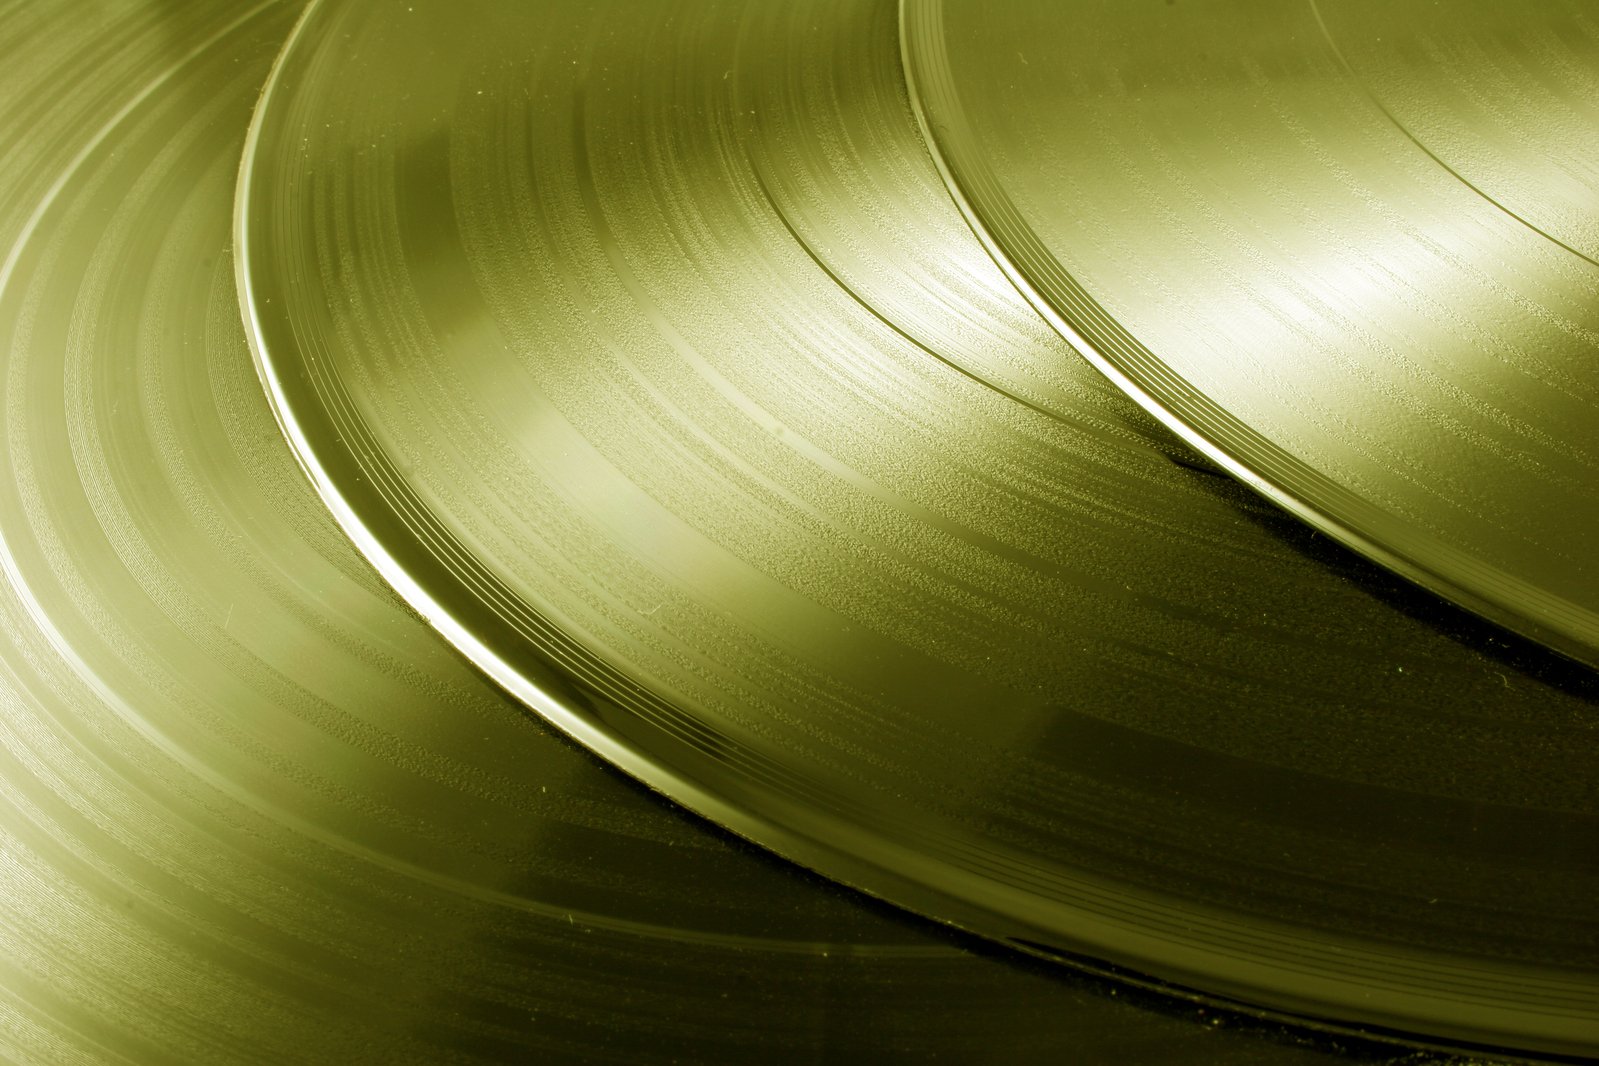 a stack of shiny metallic discs on a white background